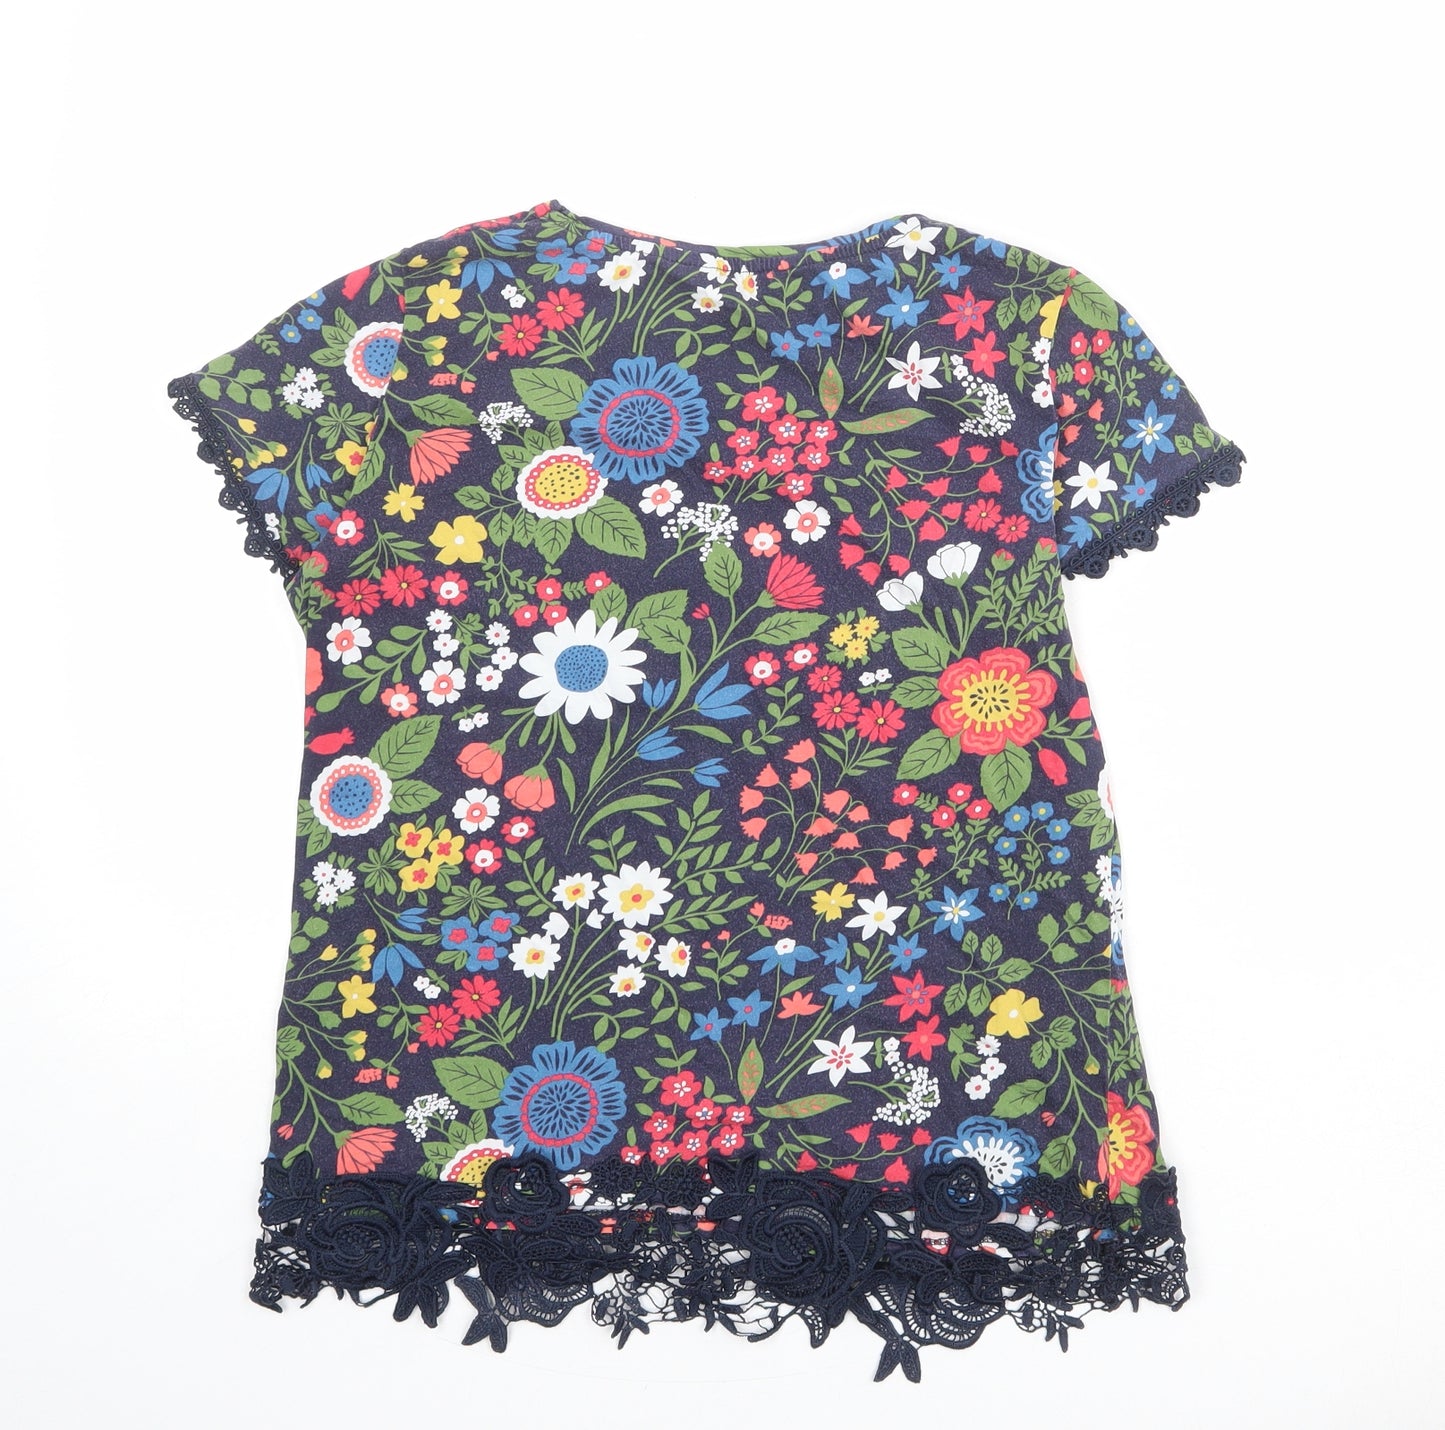 Dorothy Perkins Womens Blue Floral Cotton Basic T-Shirt Size 10 Boat Neck - Crocheted Lace Trim